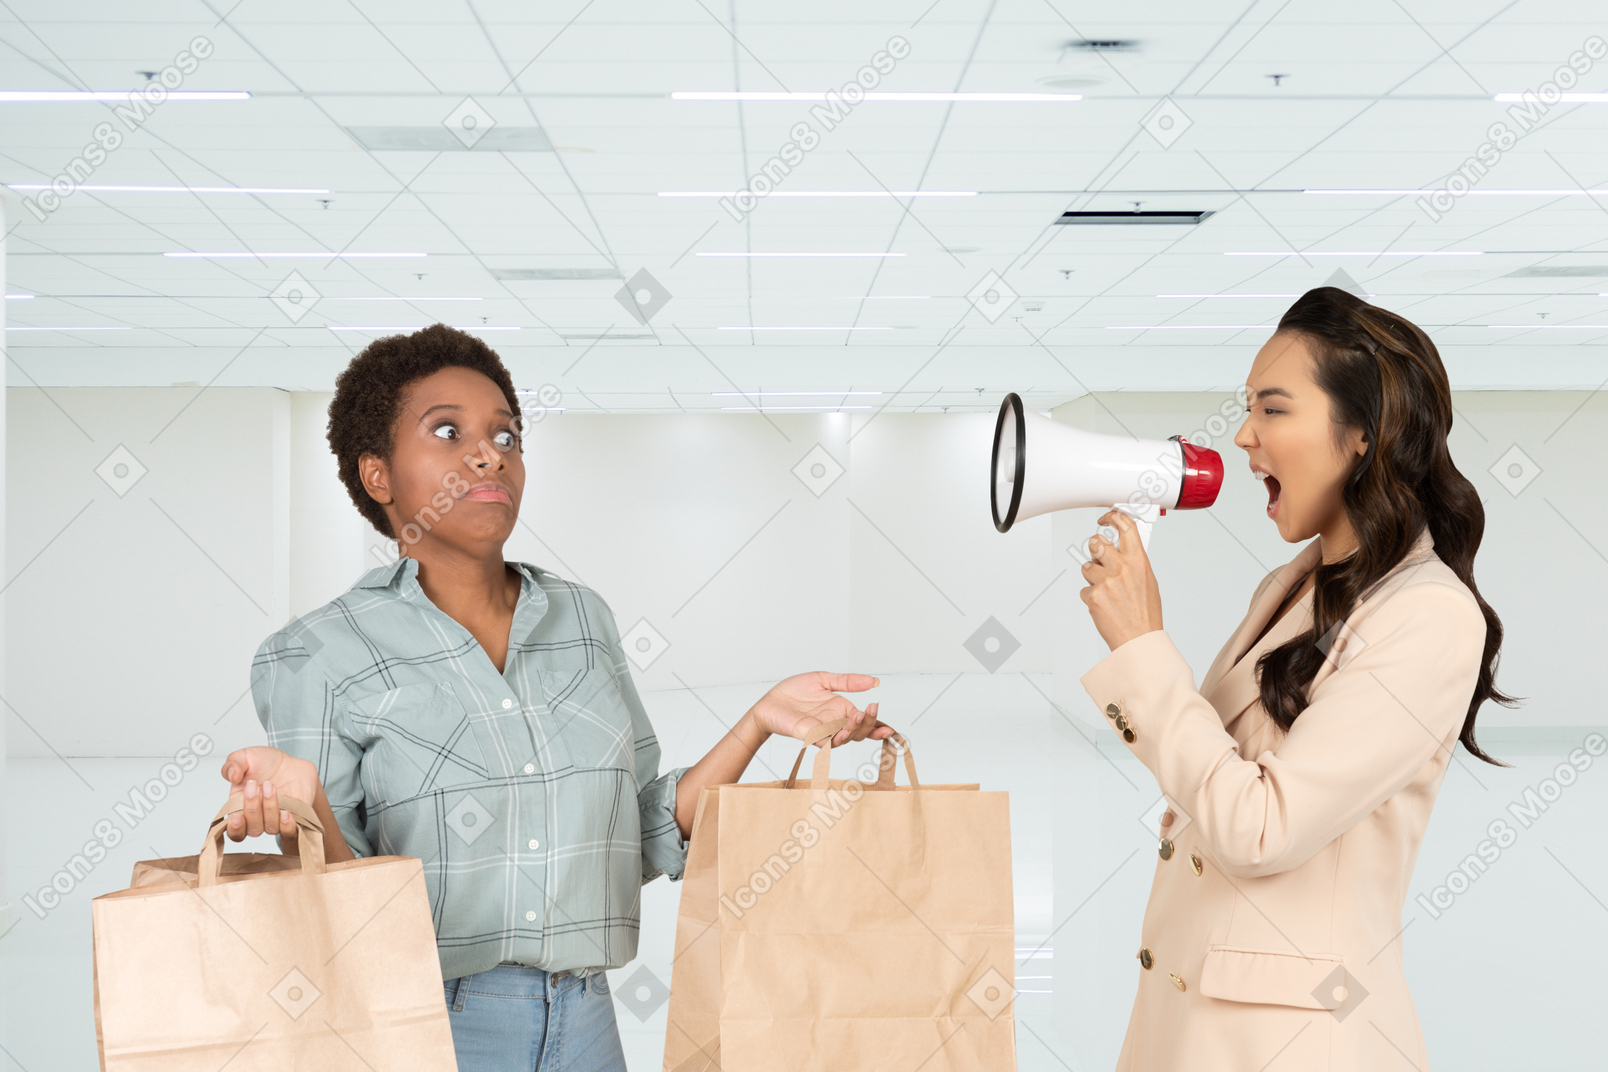 Female office employee yelling in megaphone at promoter